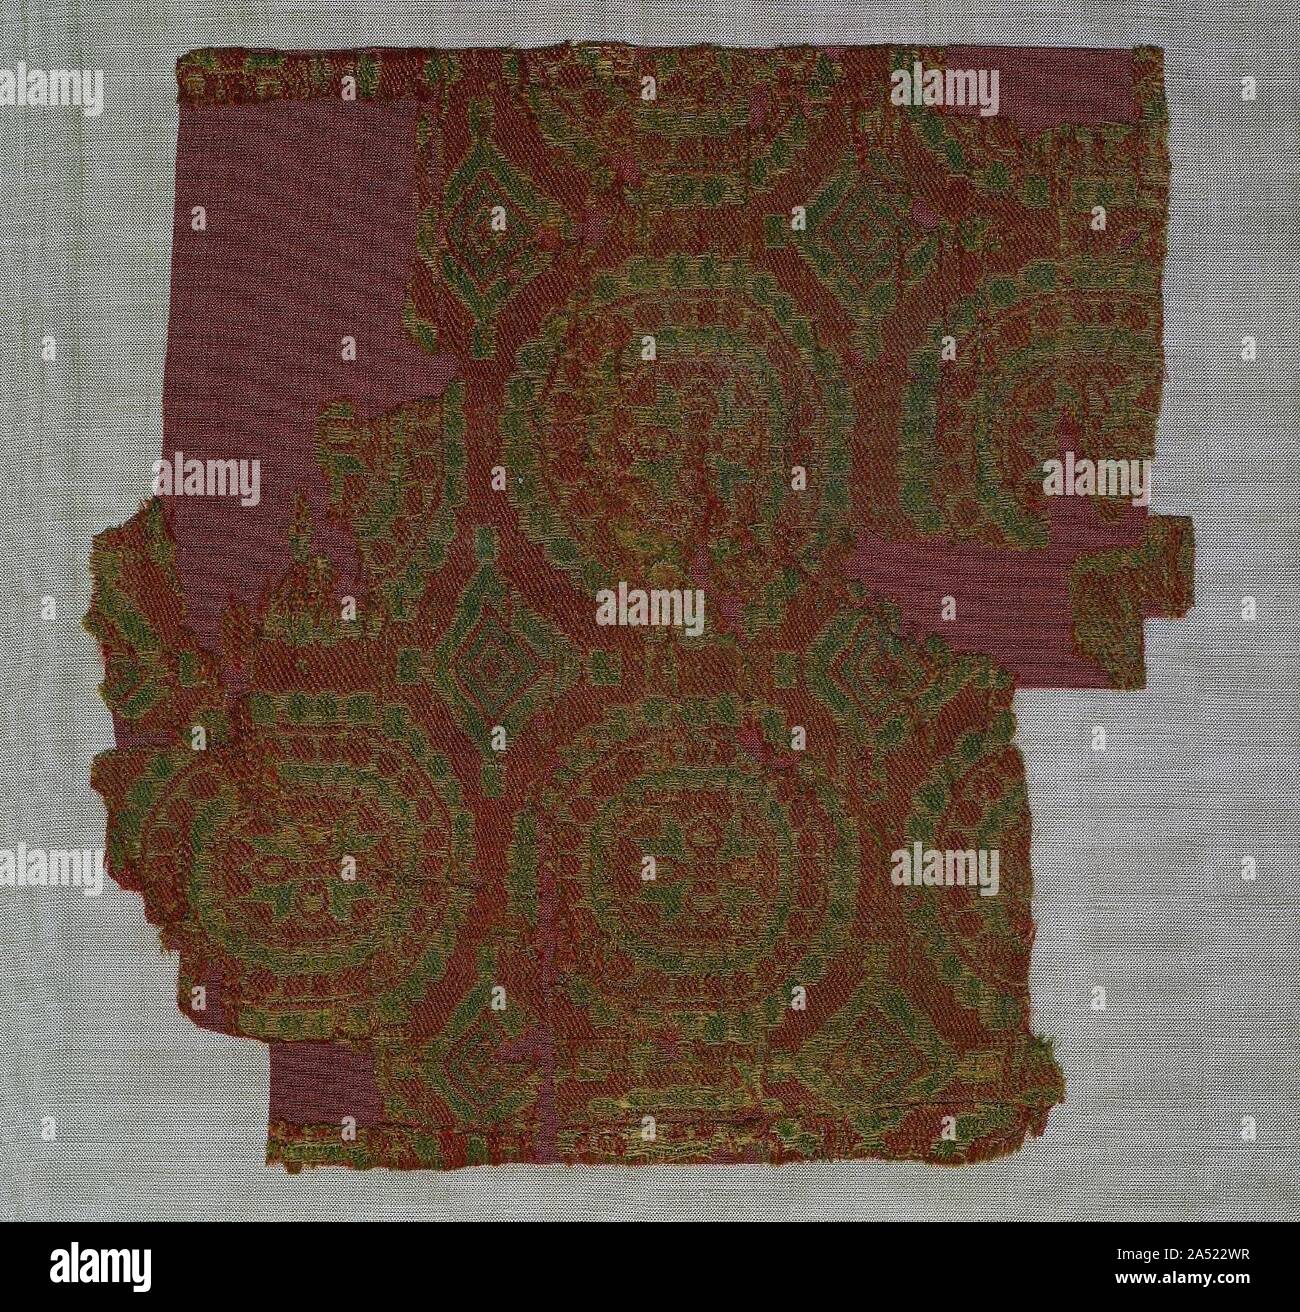 Samite with roundels of rosettes, 700s-800s. This is one of a large number of silks woven with geometric designs that have traditionally been attributed to Sogdiana. However, the untwisted warps and light weight of the silk indicate that it was woven farther east in Central Asia where Sogdian influence was strong. Similar geometric patterns occur on clothing depicted in paintings found in the Khotan oasis. That region maintained close cultural and economic ties with Sogdiana. Whether this silk was woven in the Khotan oasis or elsewhere in Central Asia is not known. Stock Photo